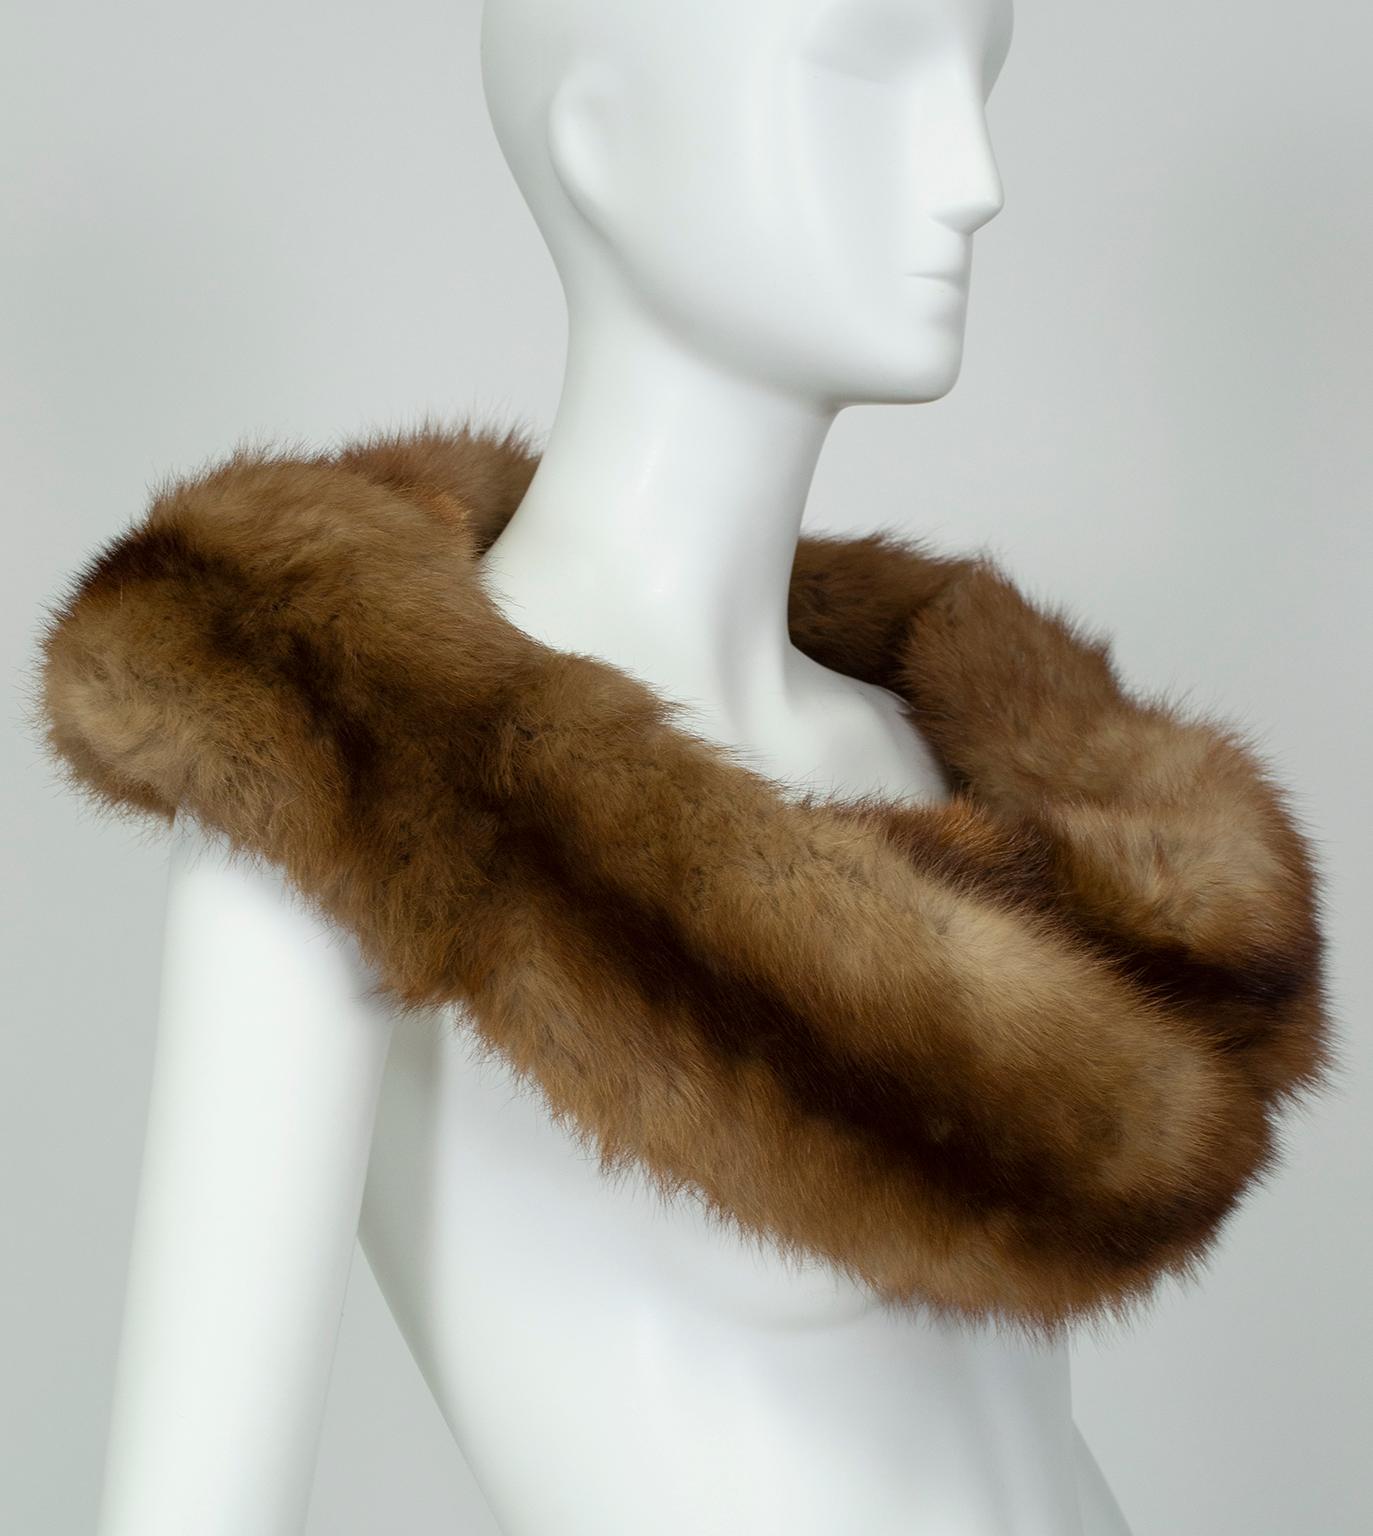 As timeless as a set of pearls, fur shoulder cowls convey ladylike elegance and remains essential-wearing with strapless dresses. The braided feature on this piece permits a variety of uses: clasp around shoulders as a wrap, tuck one end through